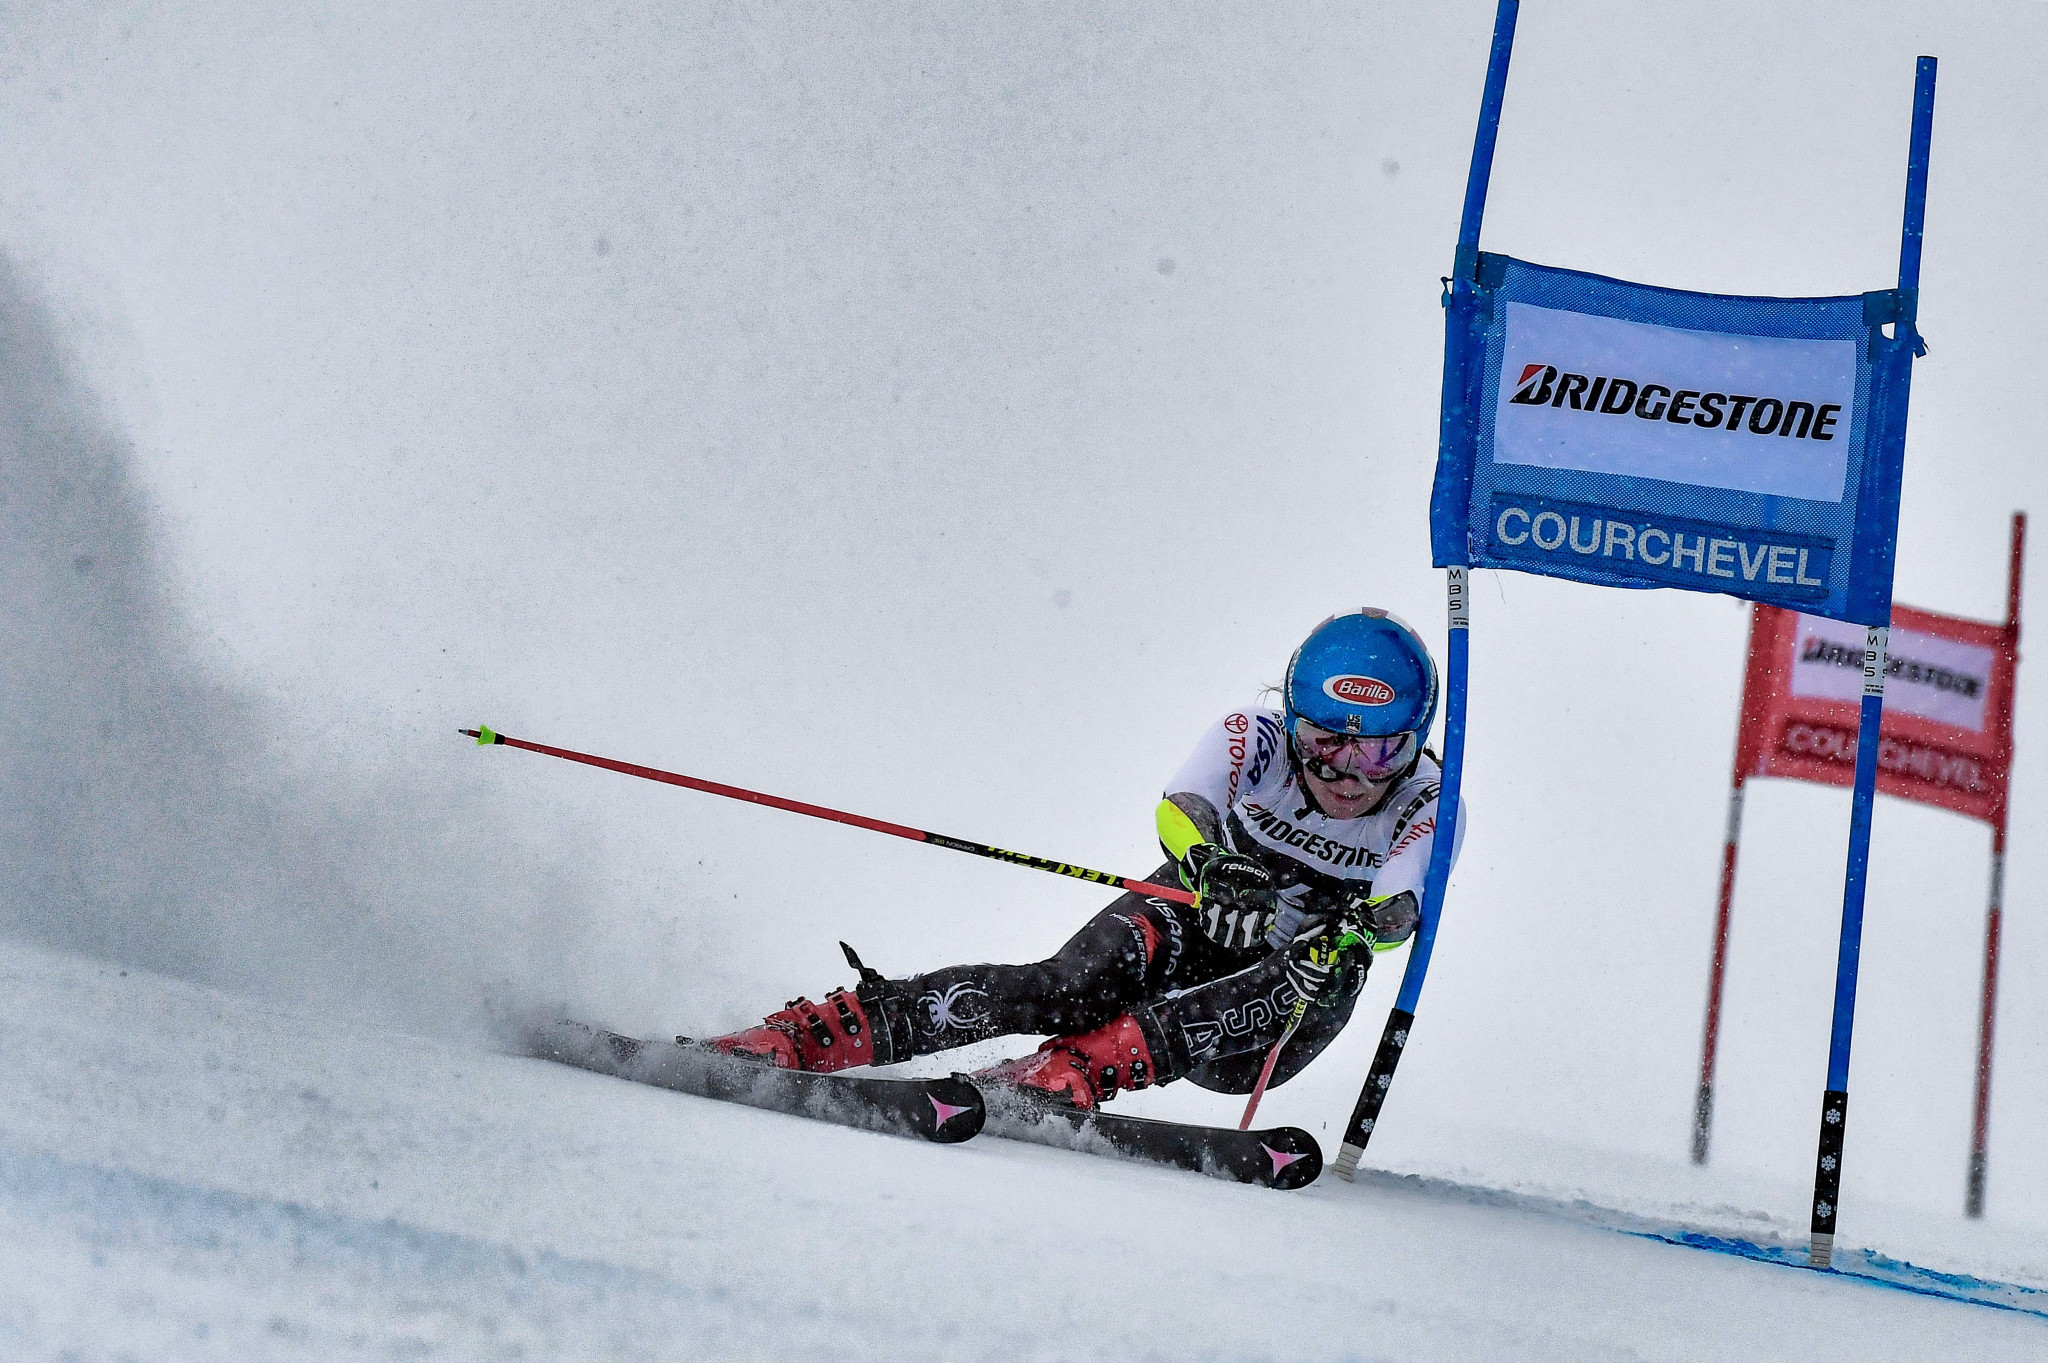 Going into her second run Mikaela Shiffrin was behind, but she managed to make up the difference ©Getty Images